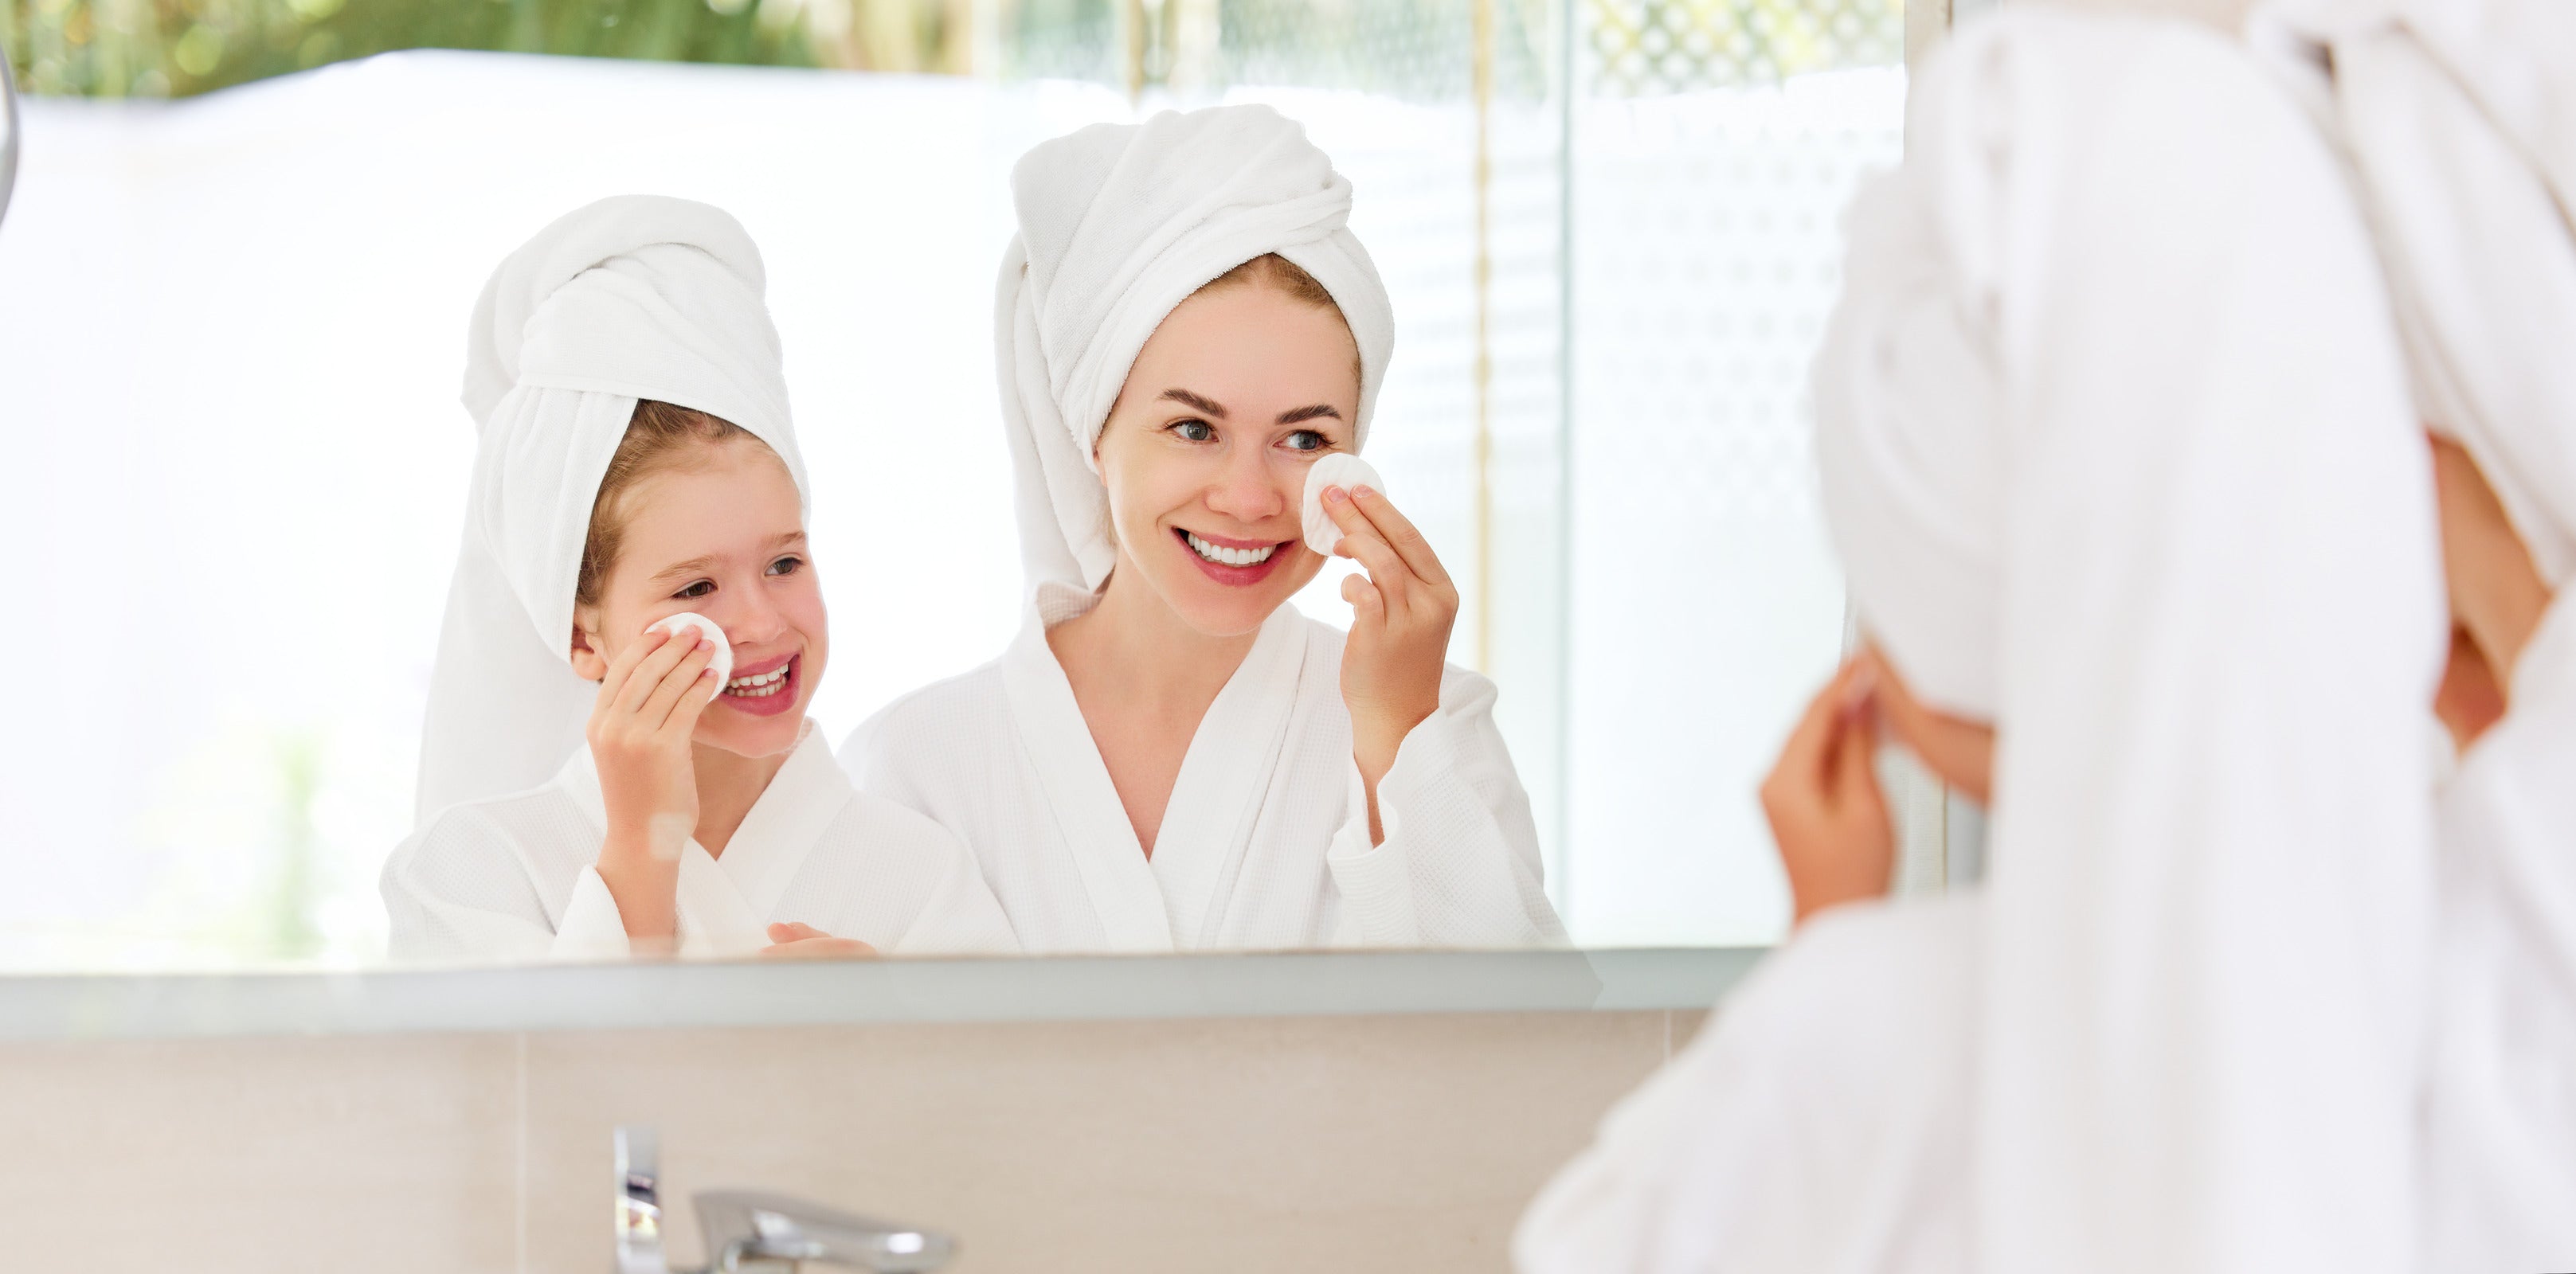 5 Tips for Morning Skin Care at Home